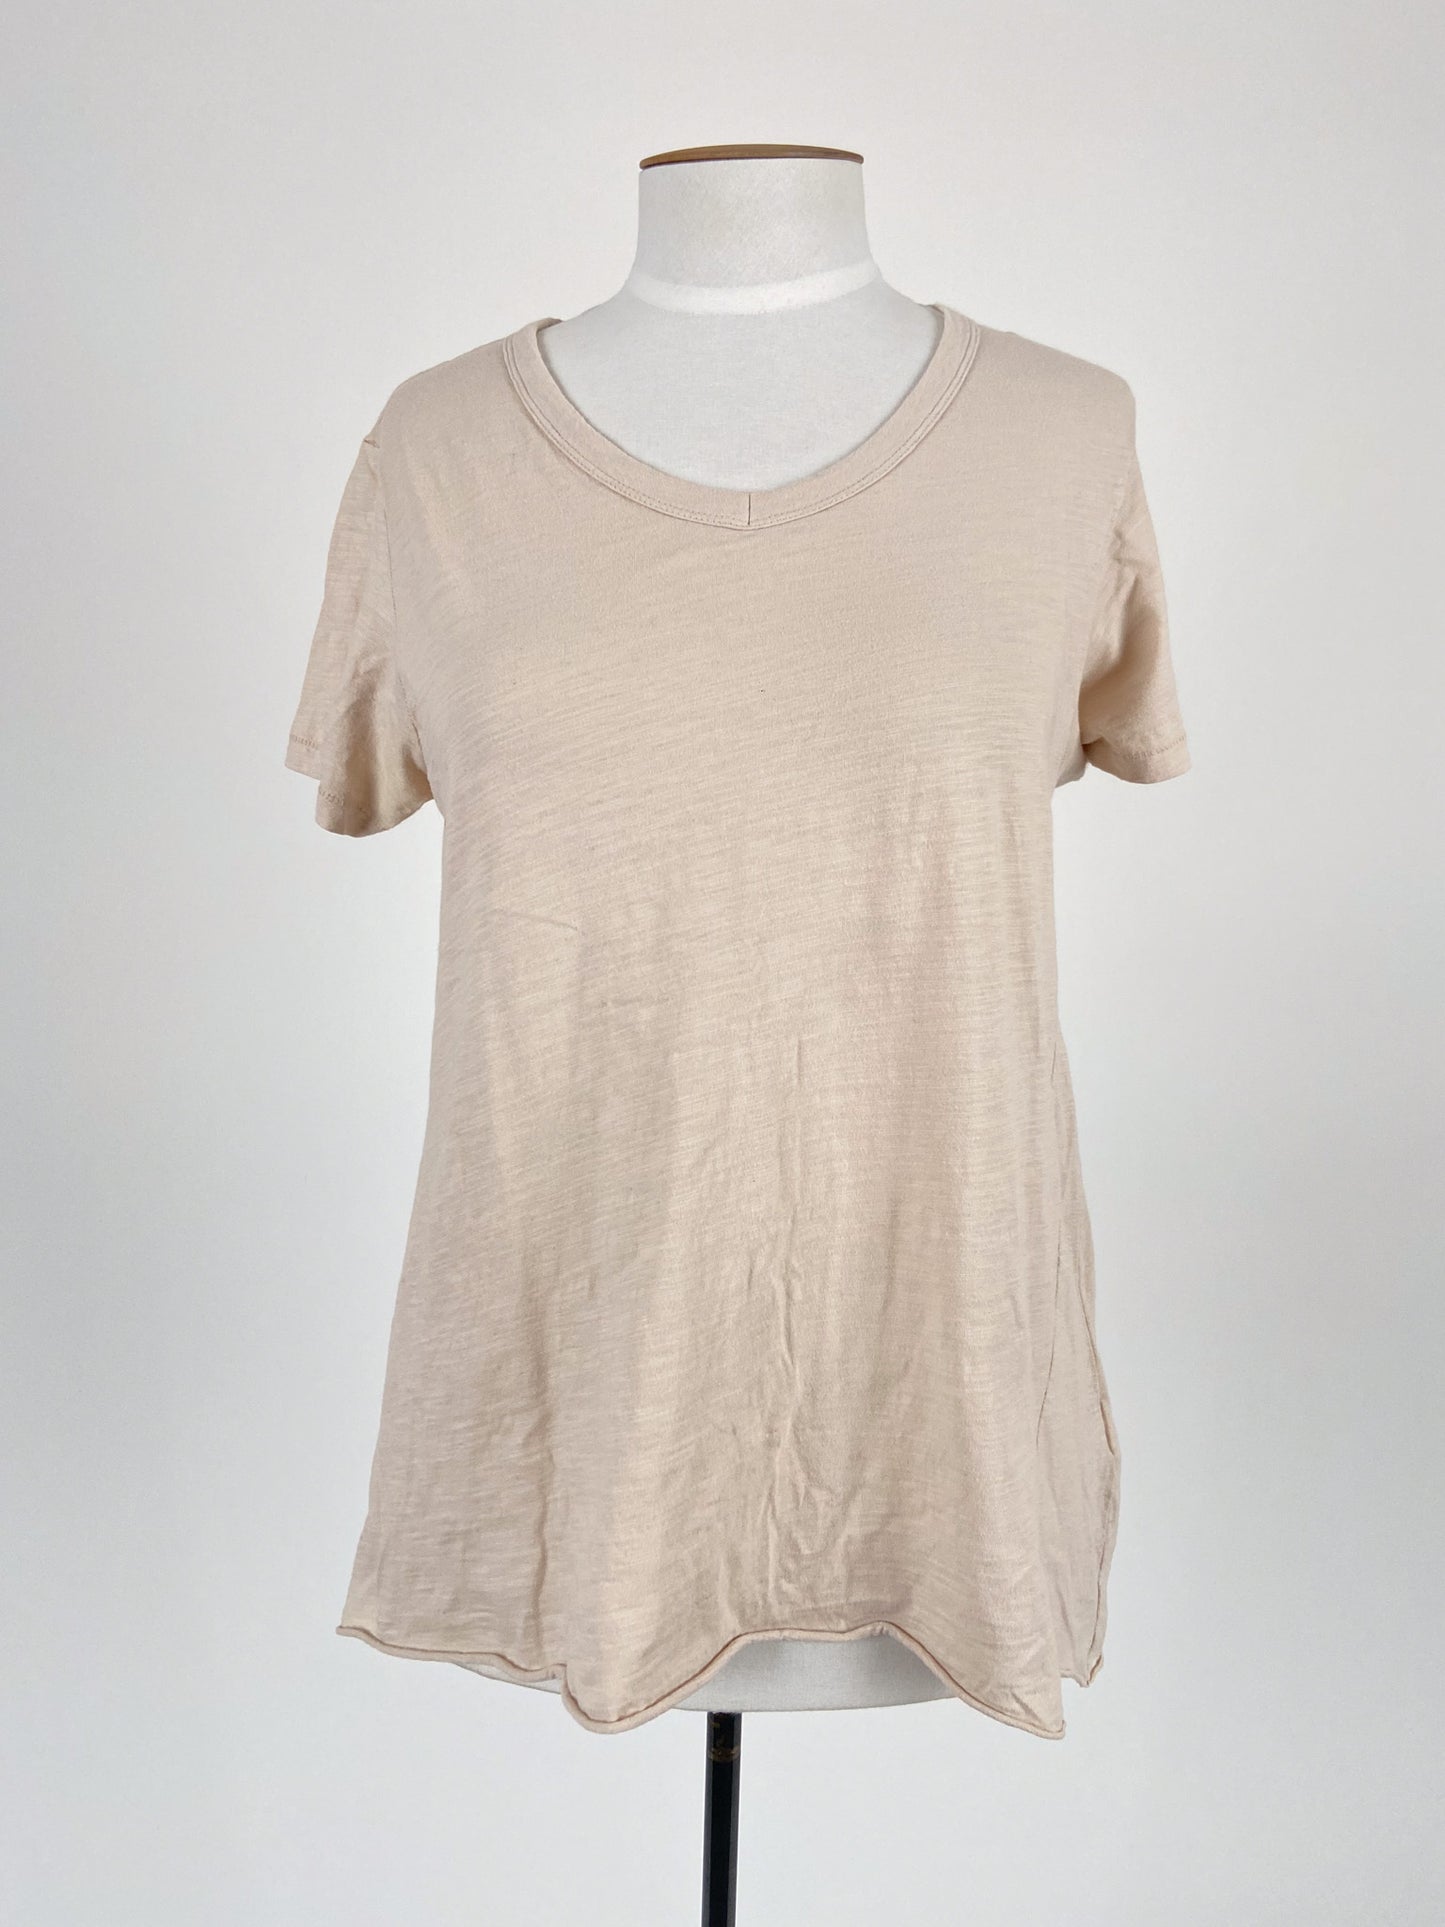 Commoners | Beige Casual Top | Size 10